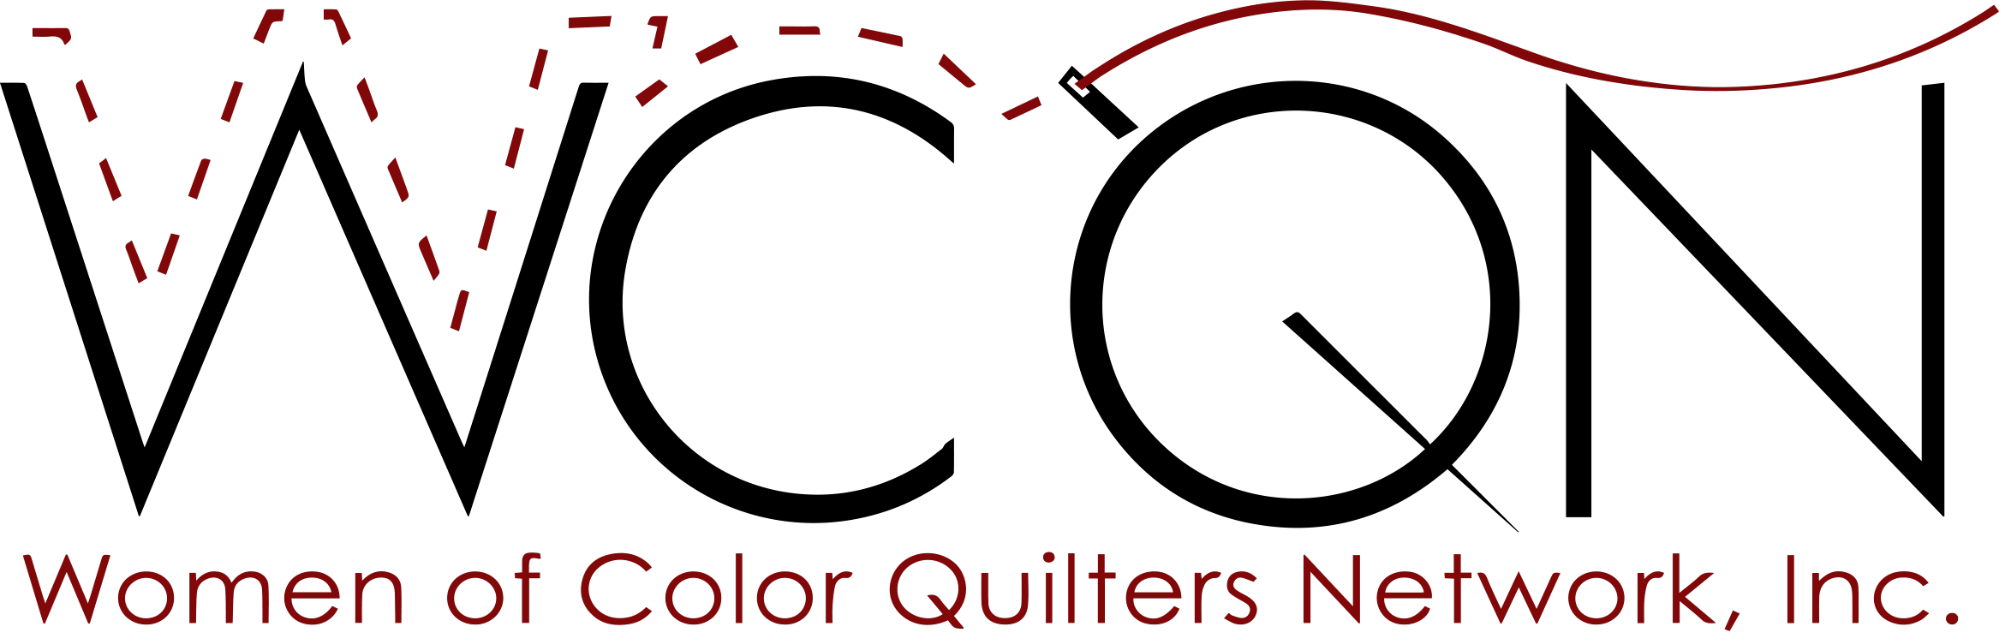 Women of Color Quilters Network logo